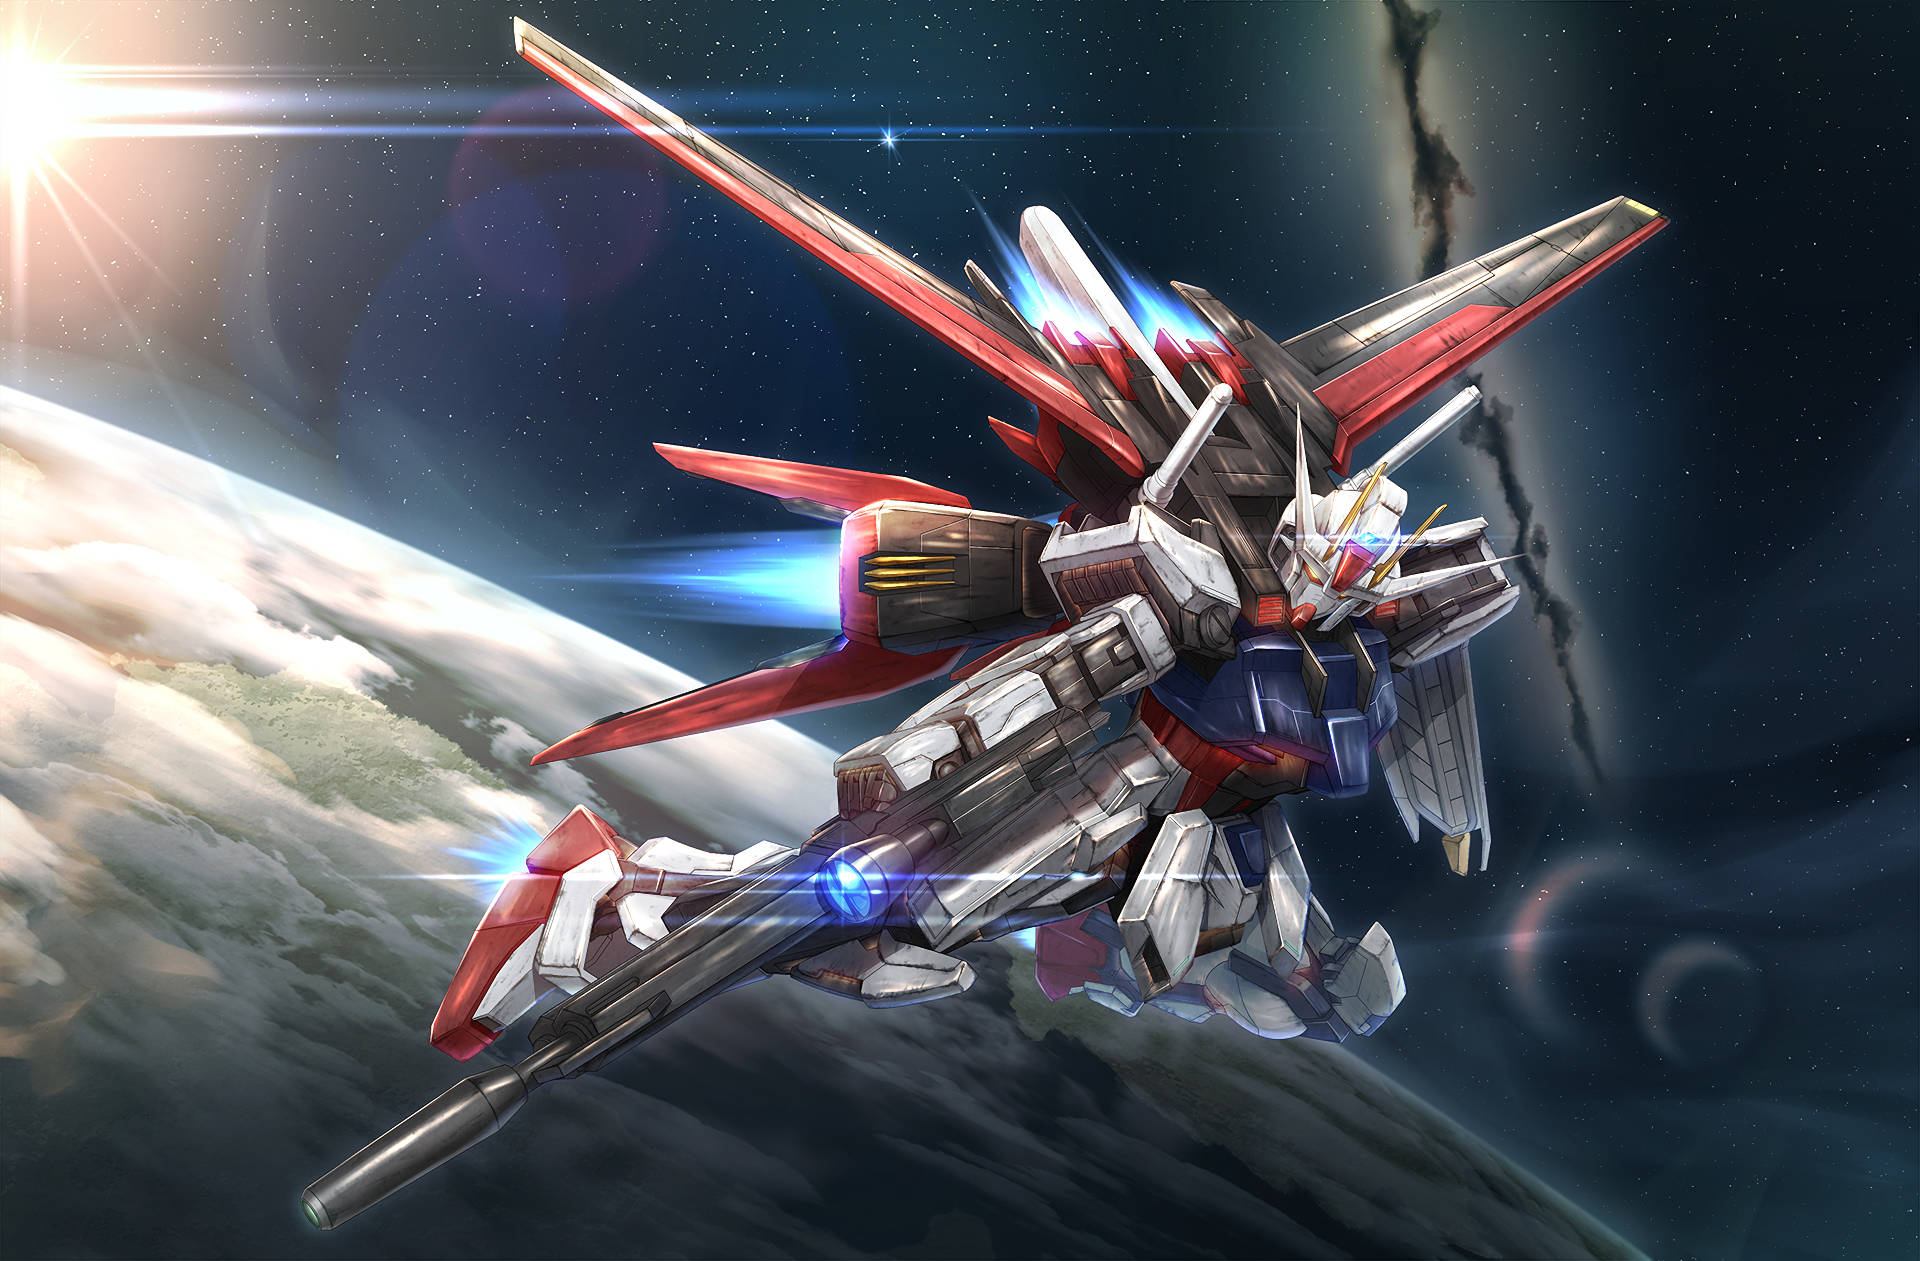 Witness the awesome power of Gundam Seed Wallpaper